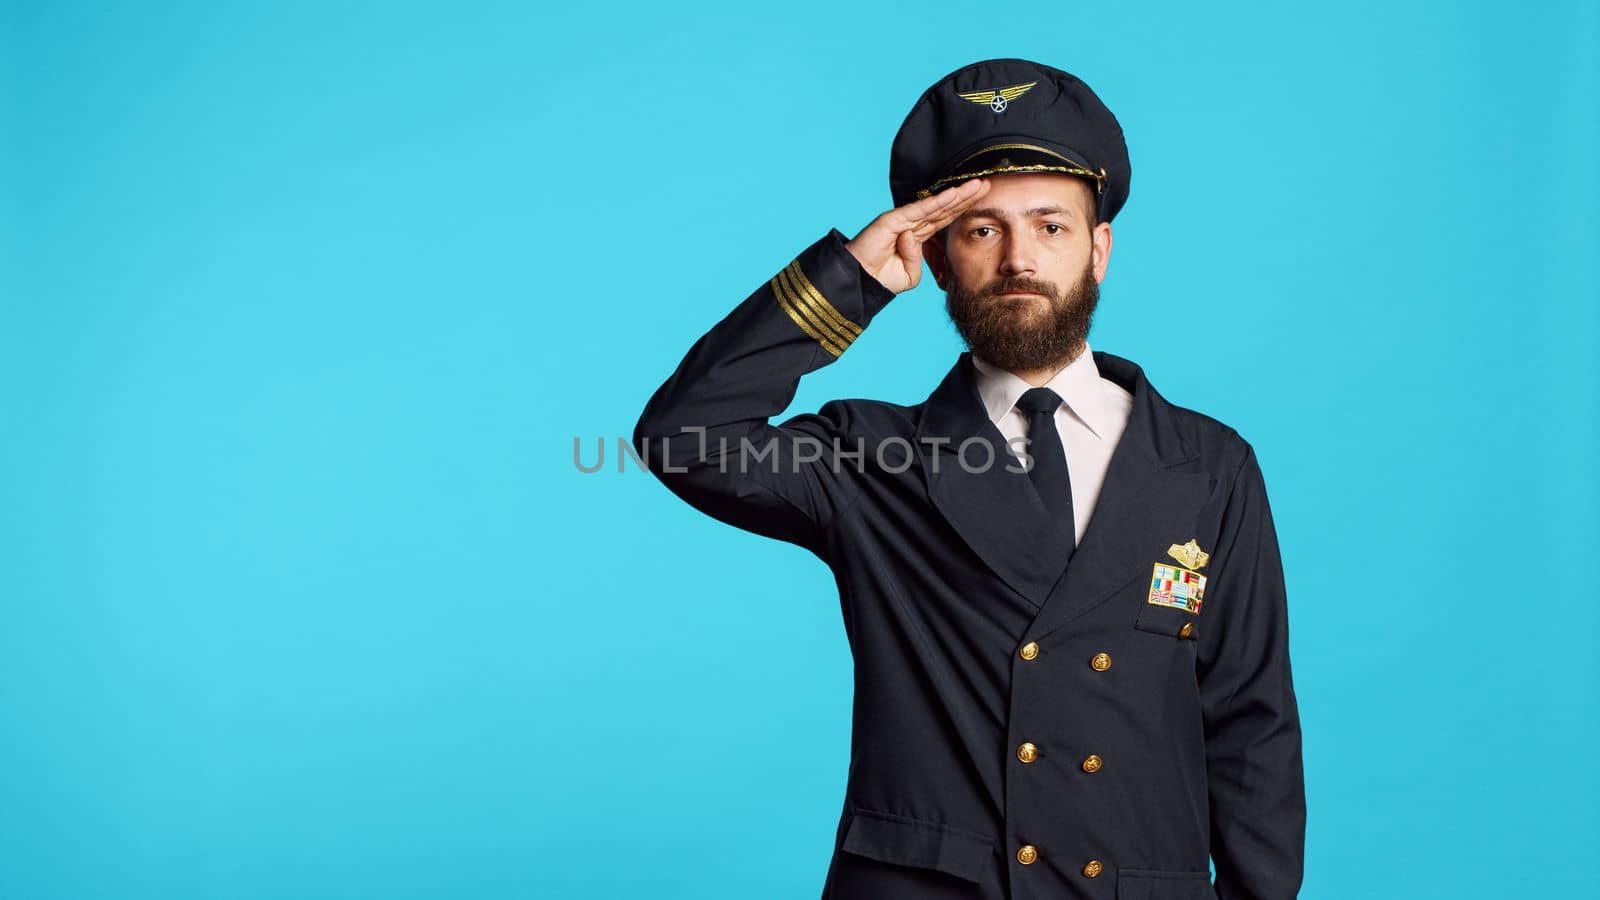 Male aviator doing military salute over blue backdrop, showing respect for army. Airplane captain serving flying industry as aviation worker, working on commercial flights and transportation.